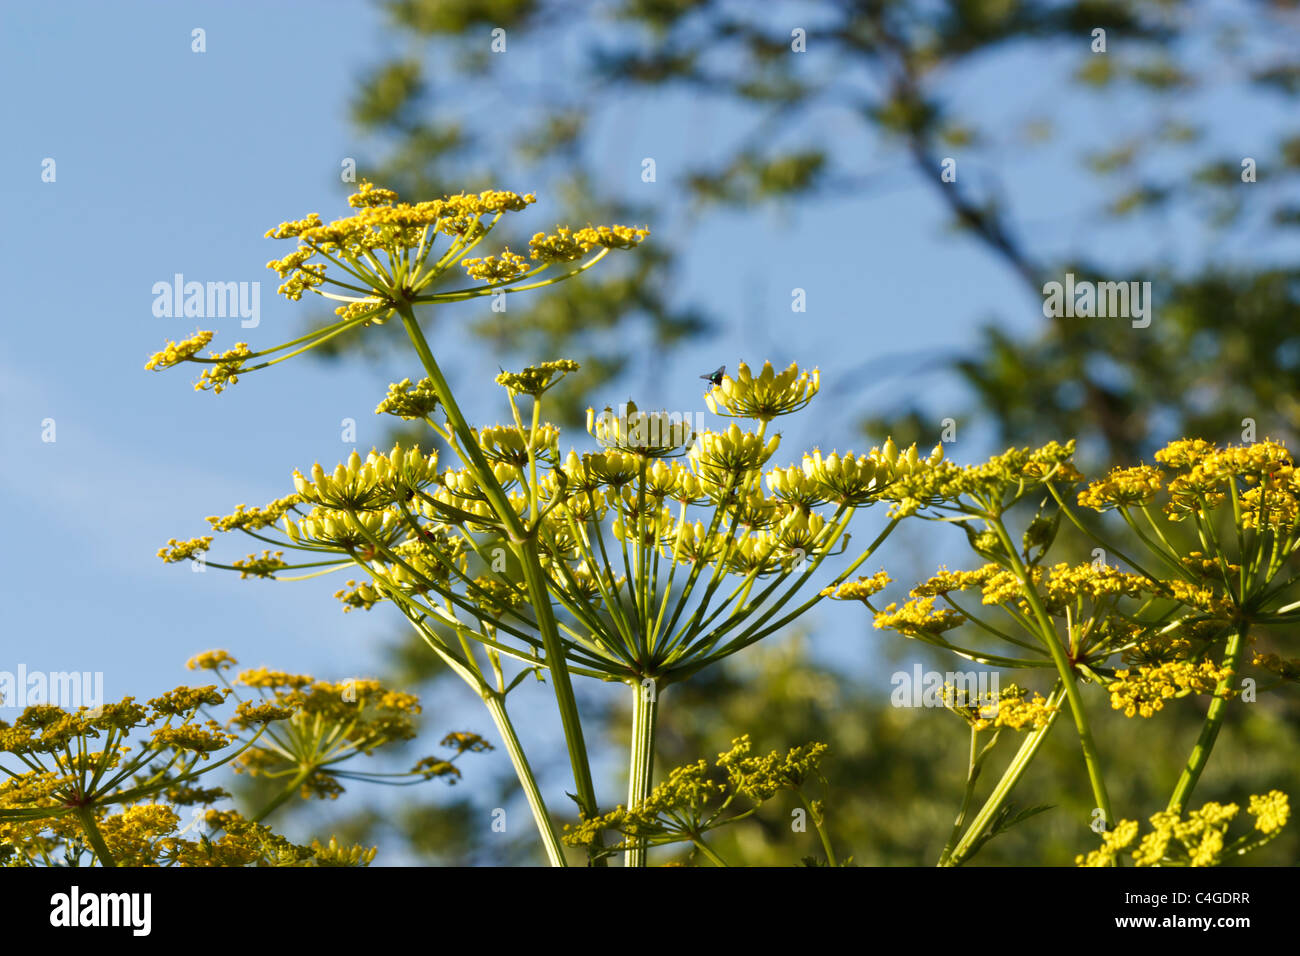 Selective focus image of a blooming Parsnip (Pastinaca sativa). Stock Photo